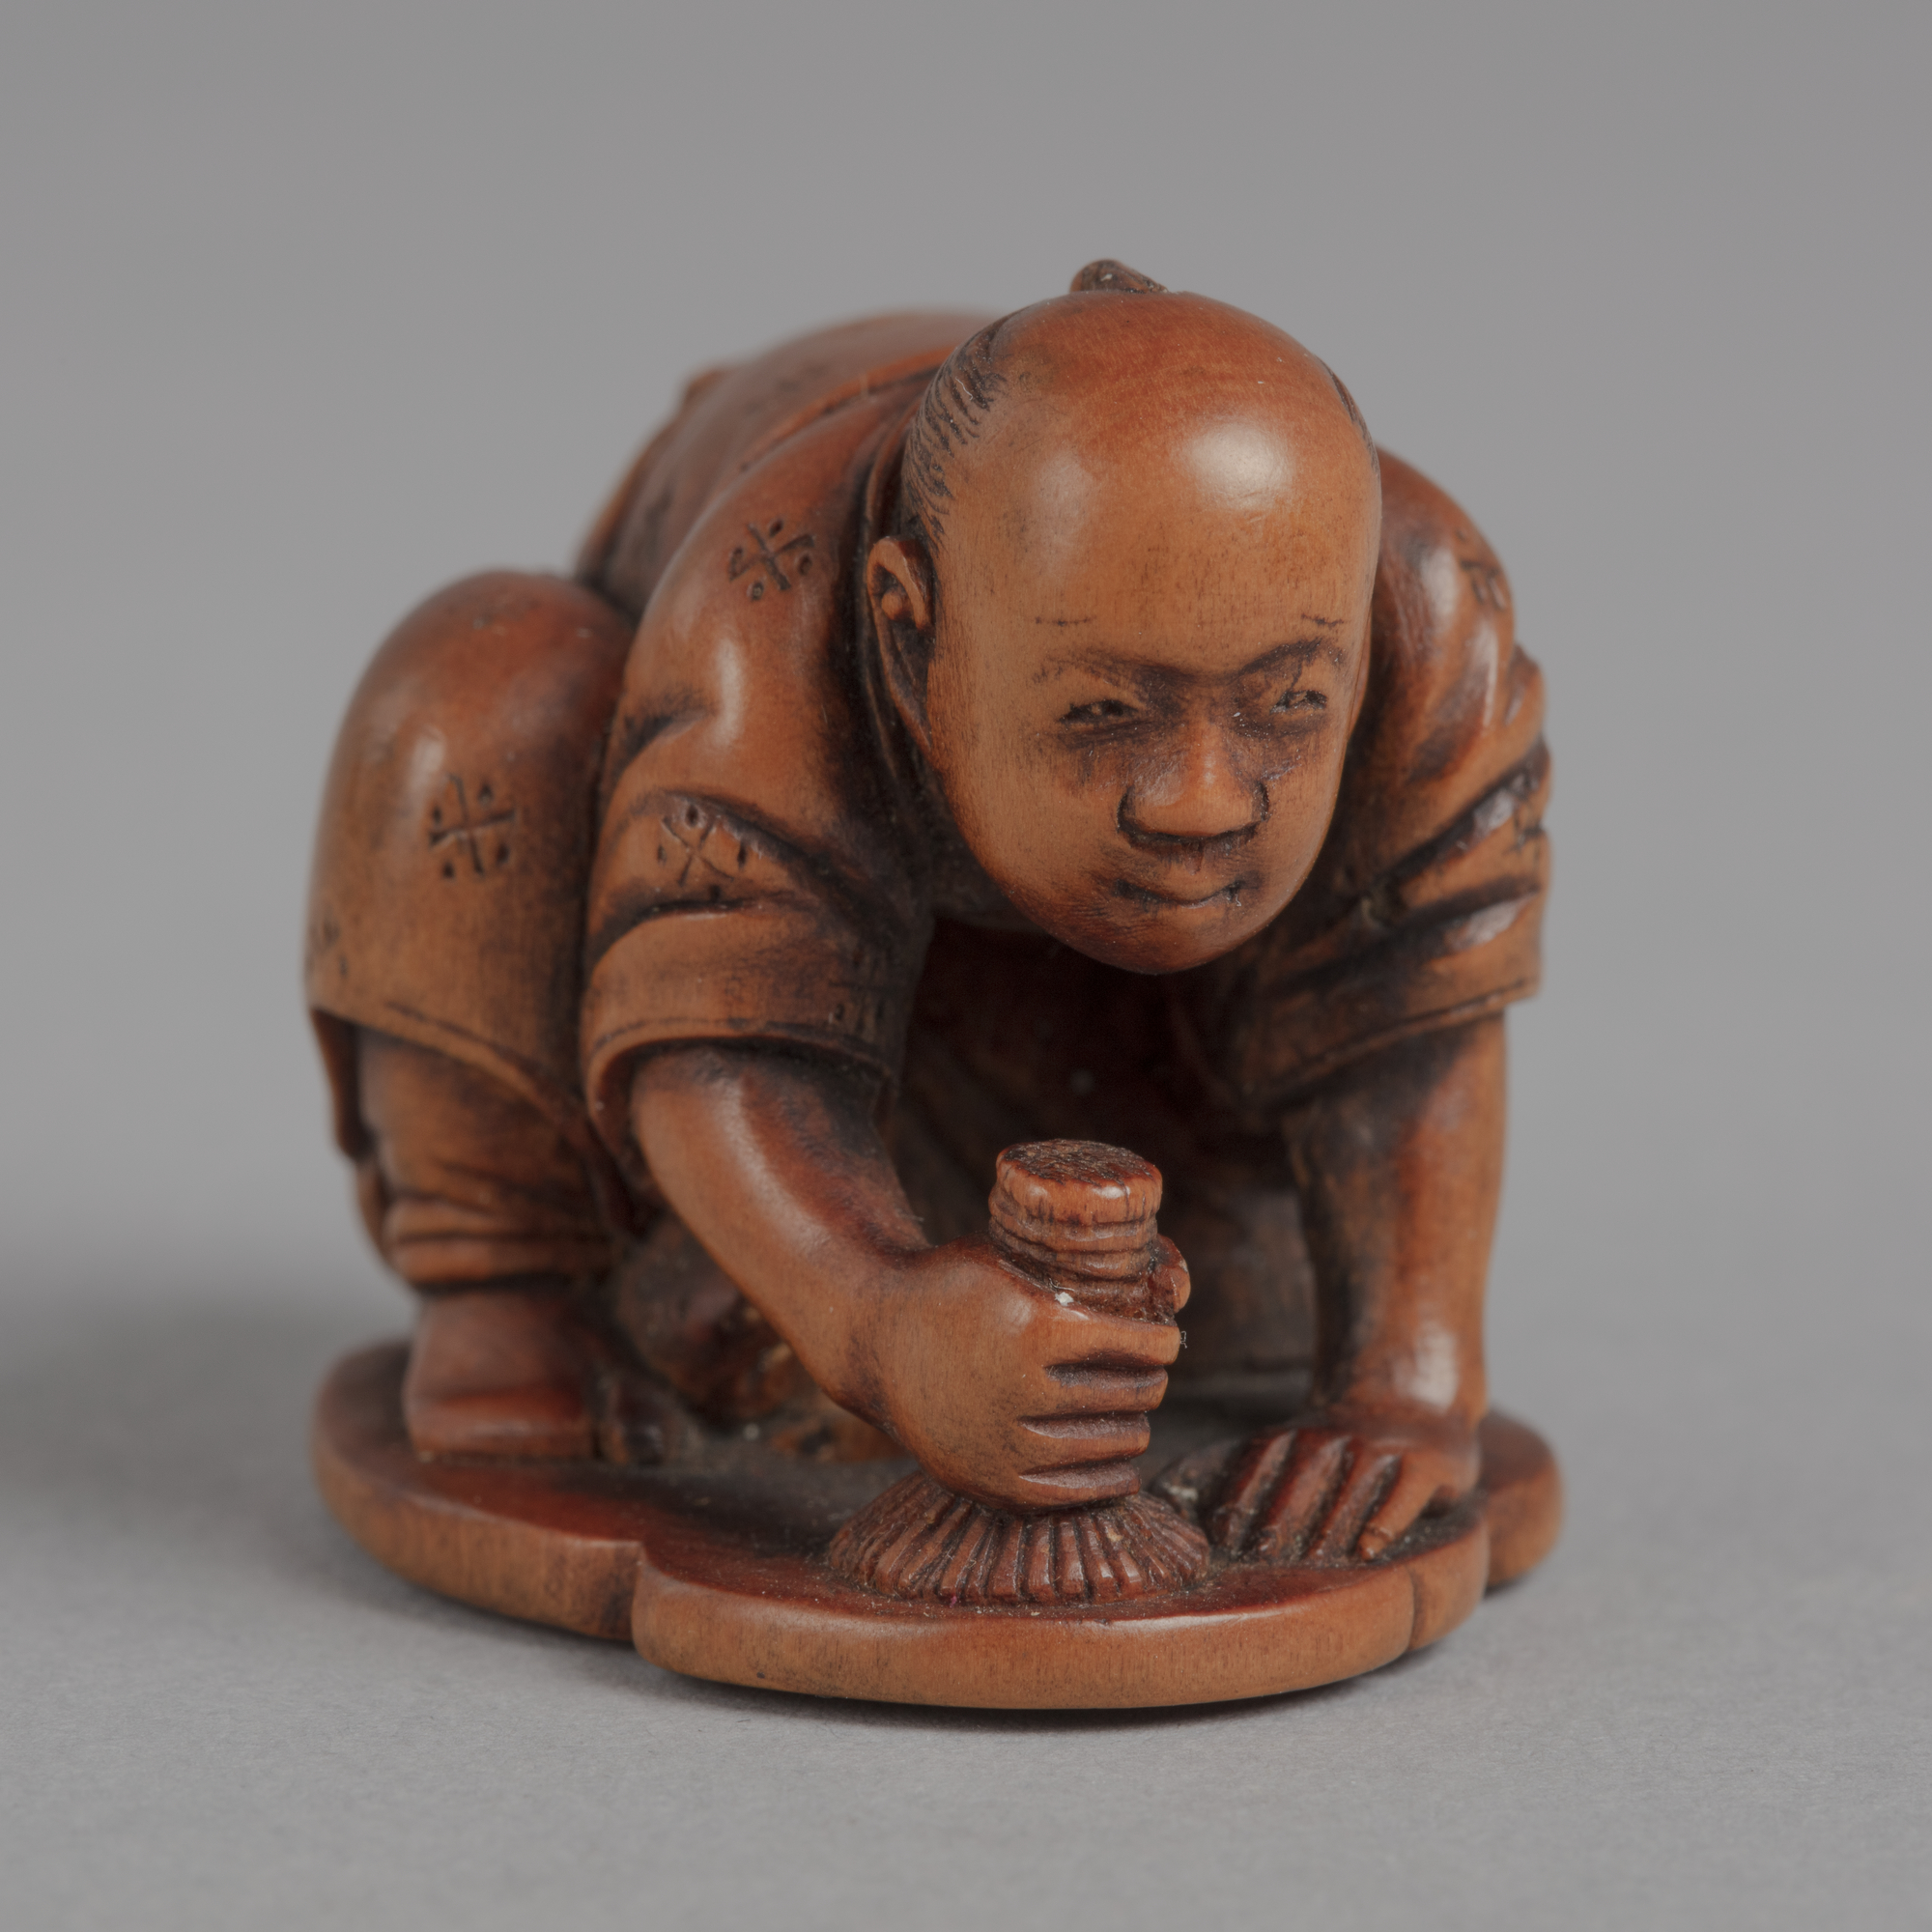 A Japanese boxwood netsuke of a man on his hands and knees polishing the floor with a brush, forming a swirling pattern.